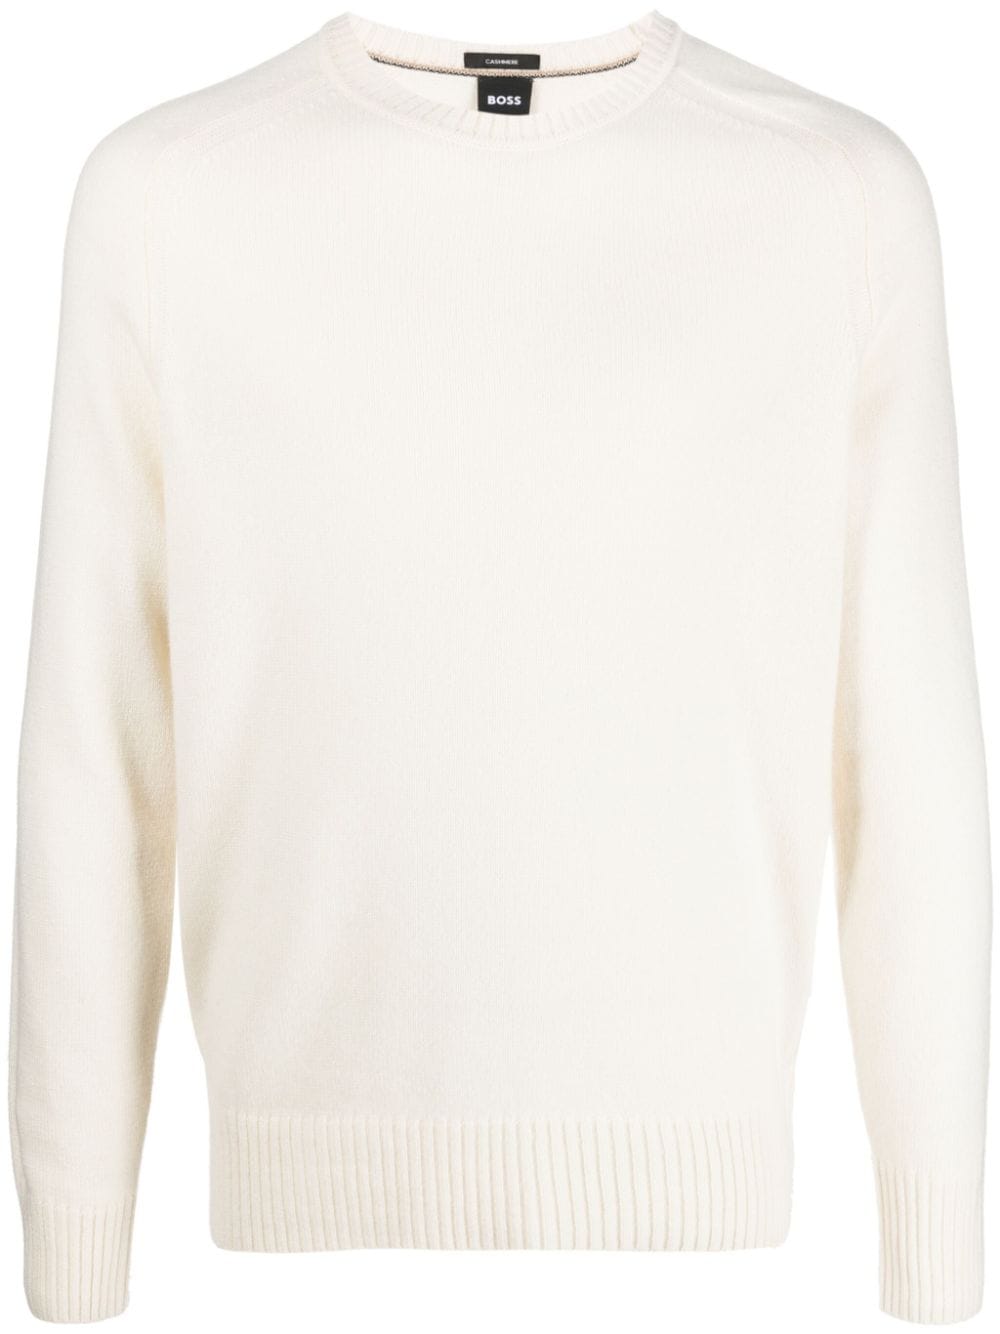 BOSS ribbed-knit cashmere jumper - White von BOSS